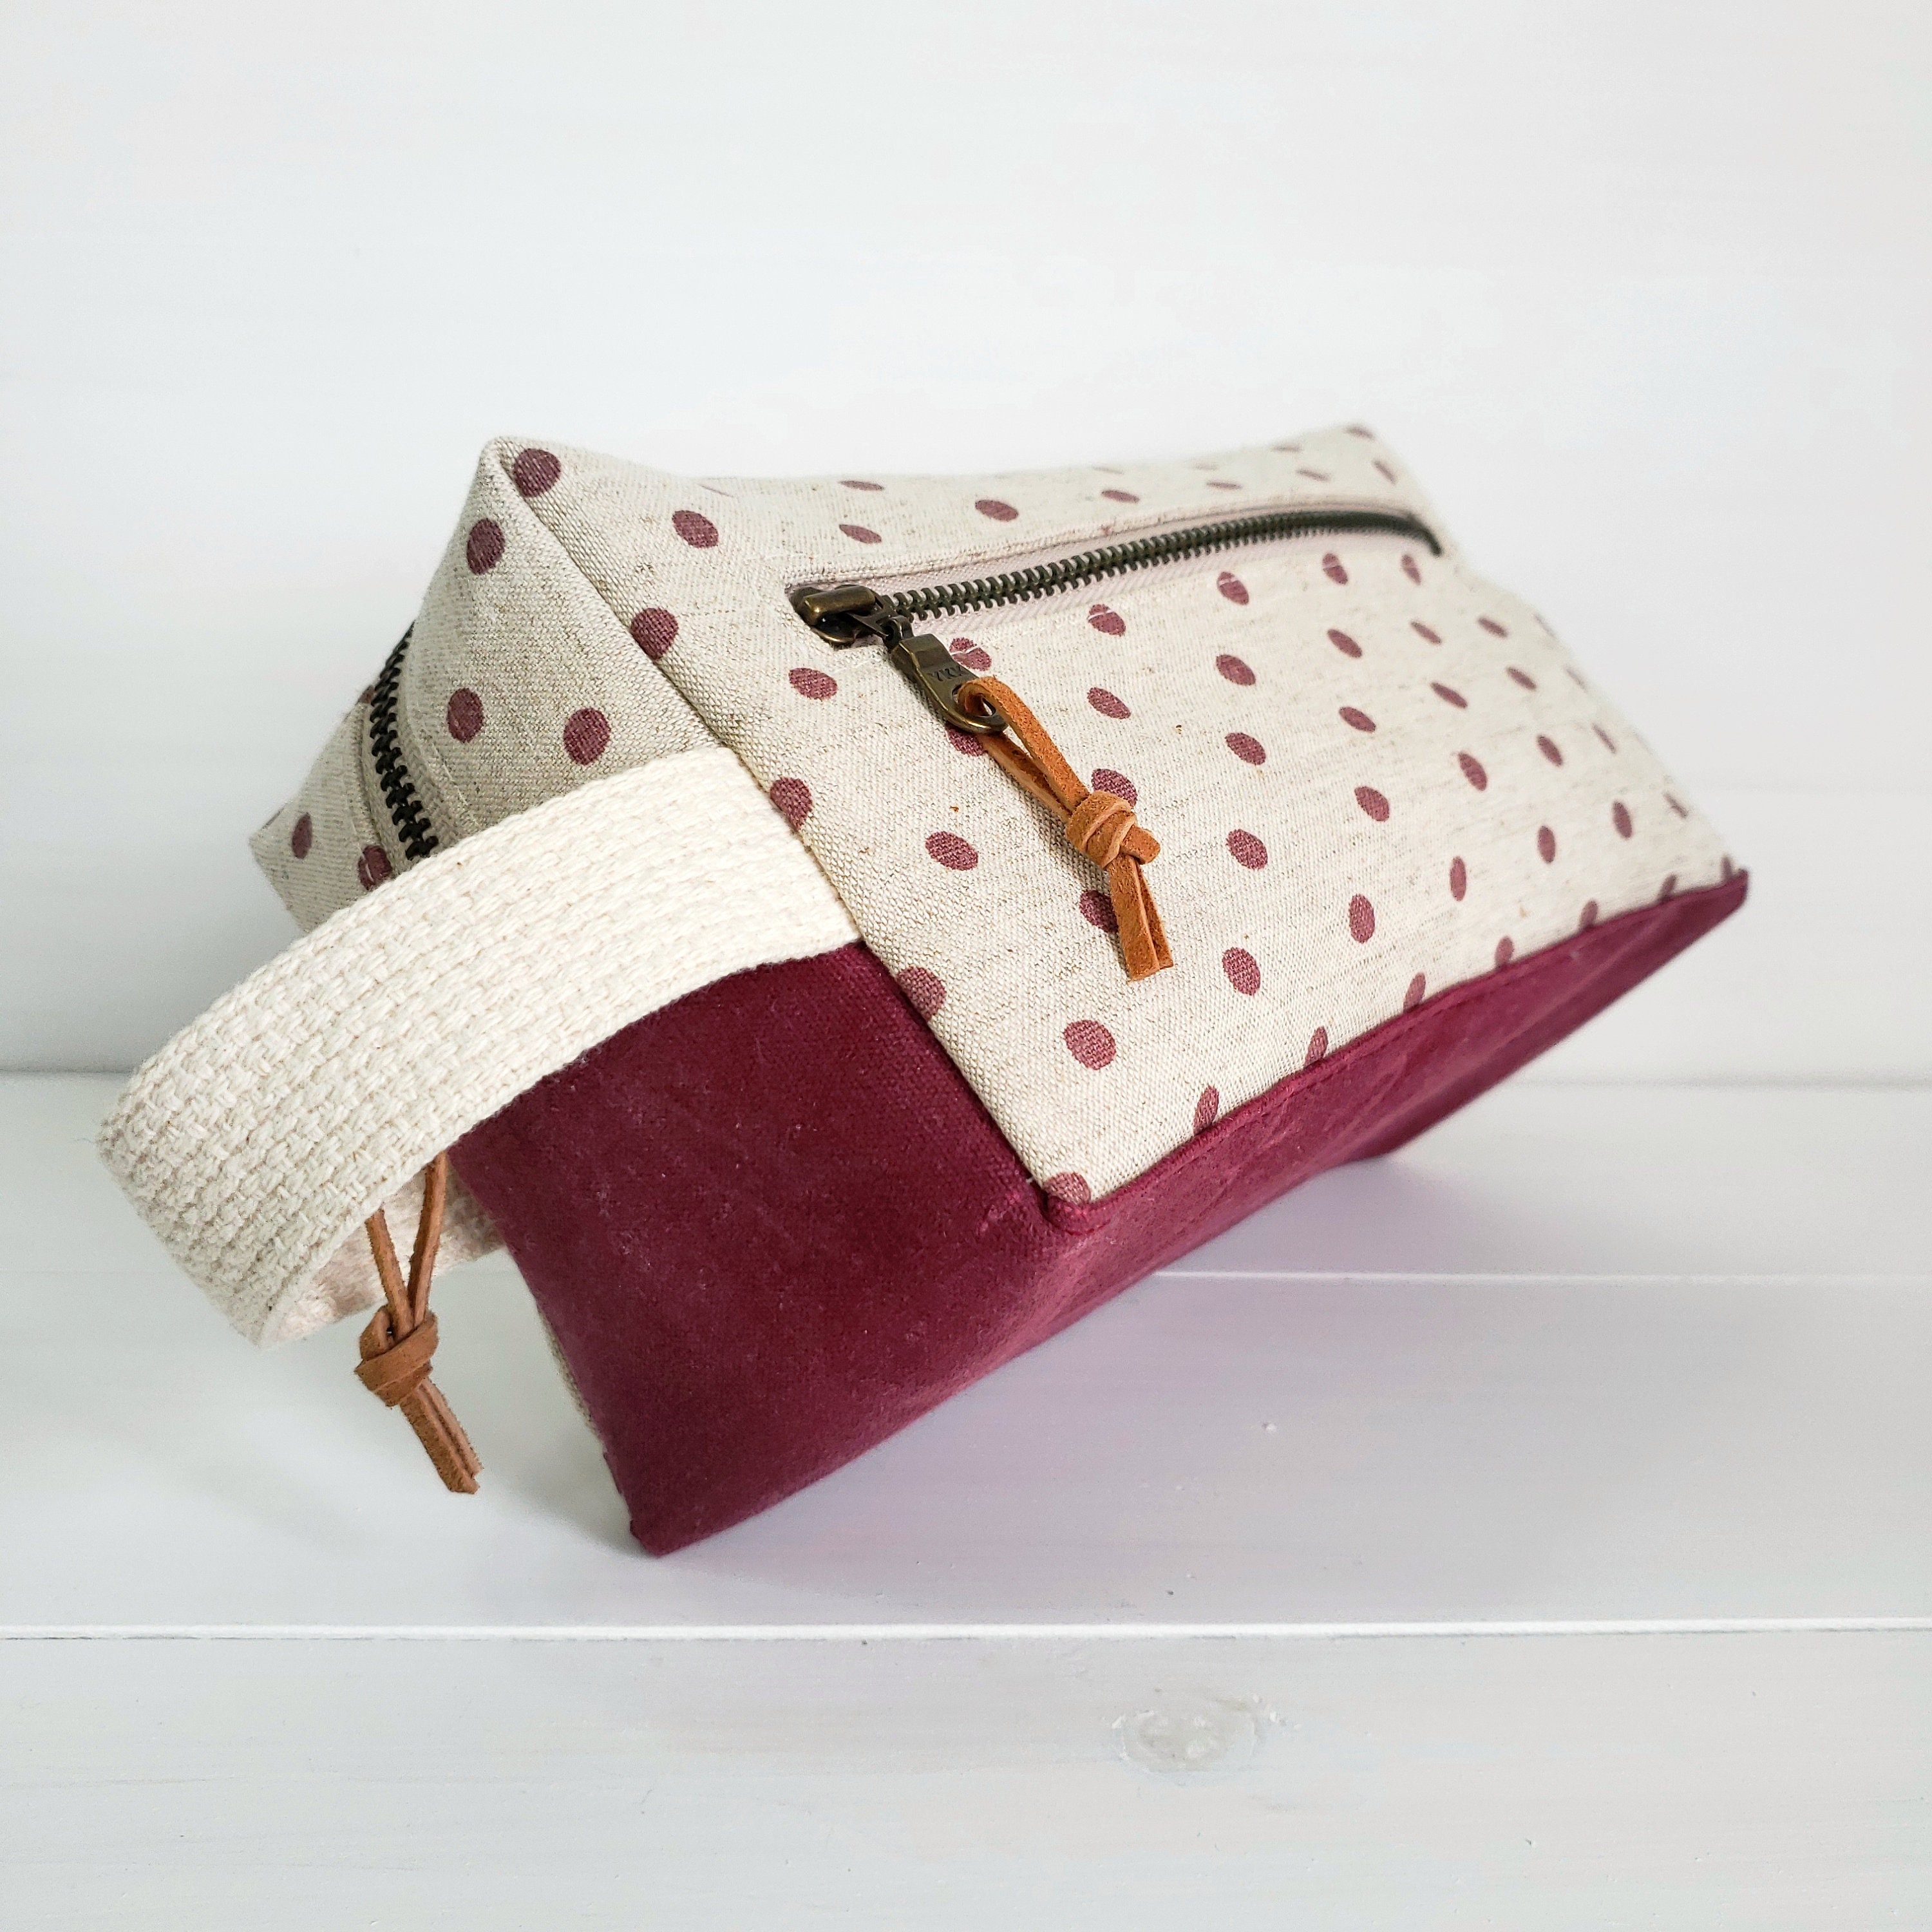 Brie's Box Toiletry Caddy Bag sewing pattern - Sew Modern Bags